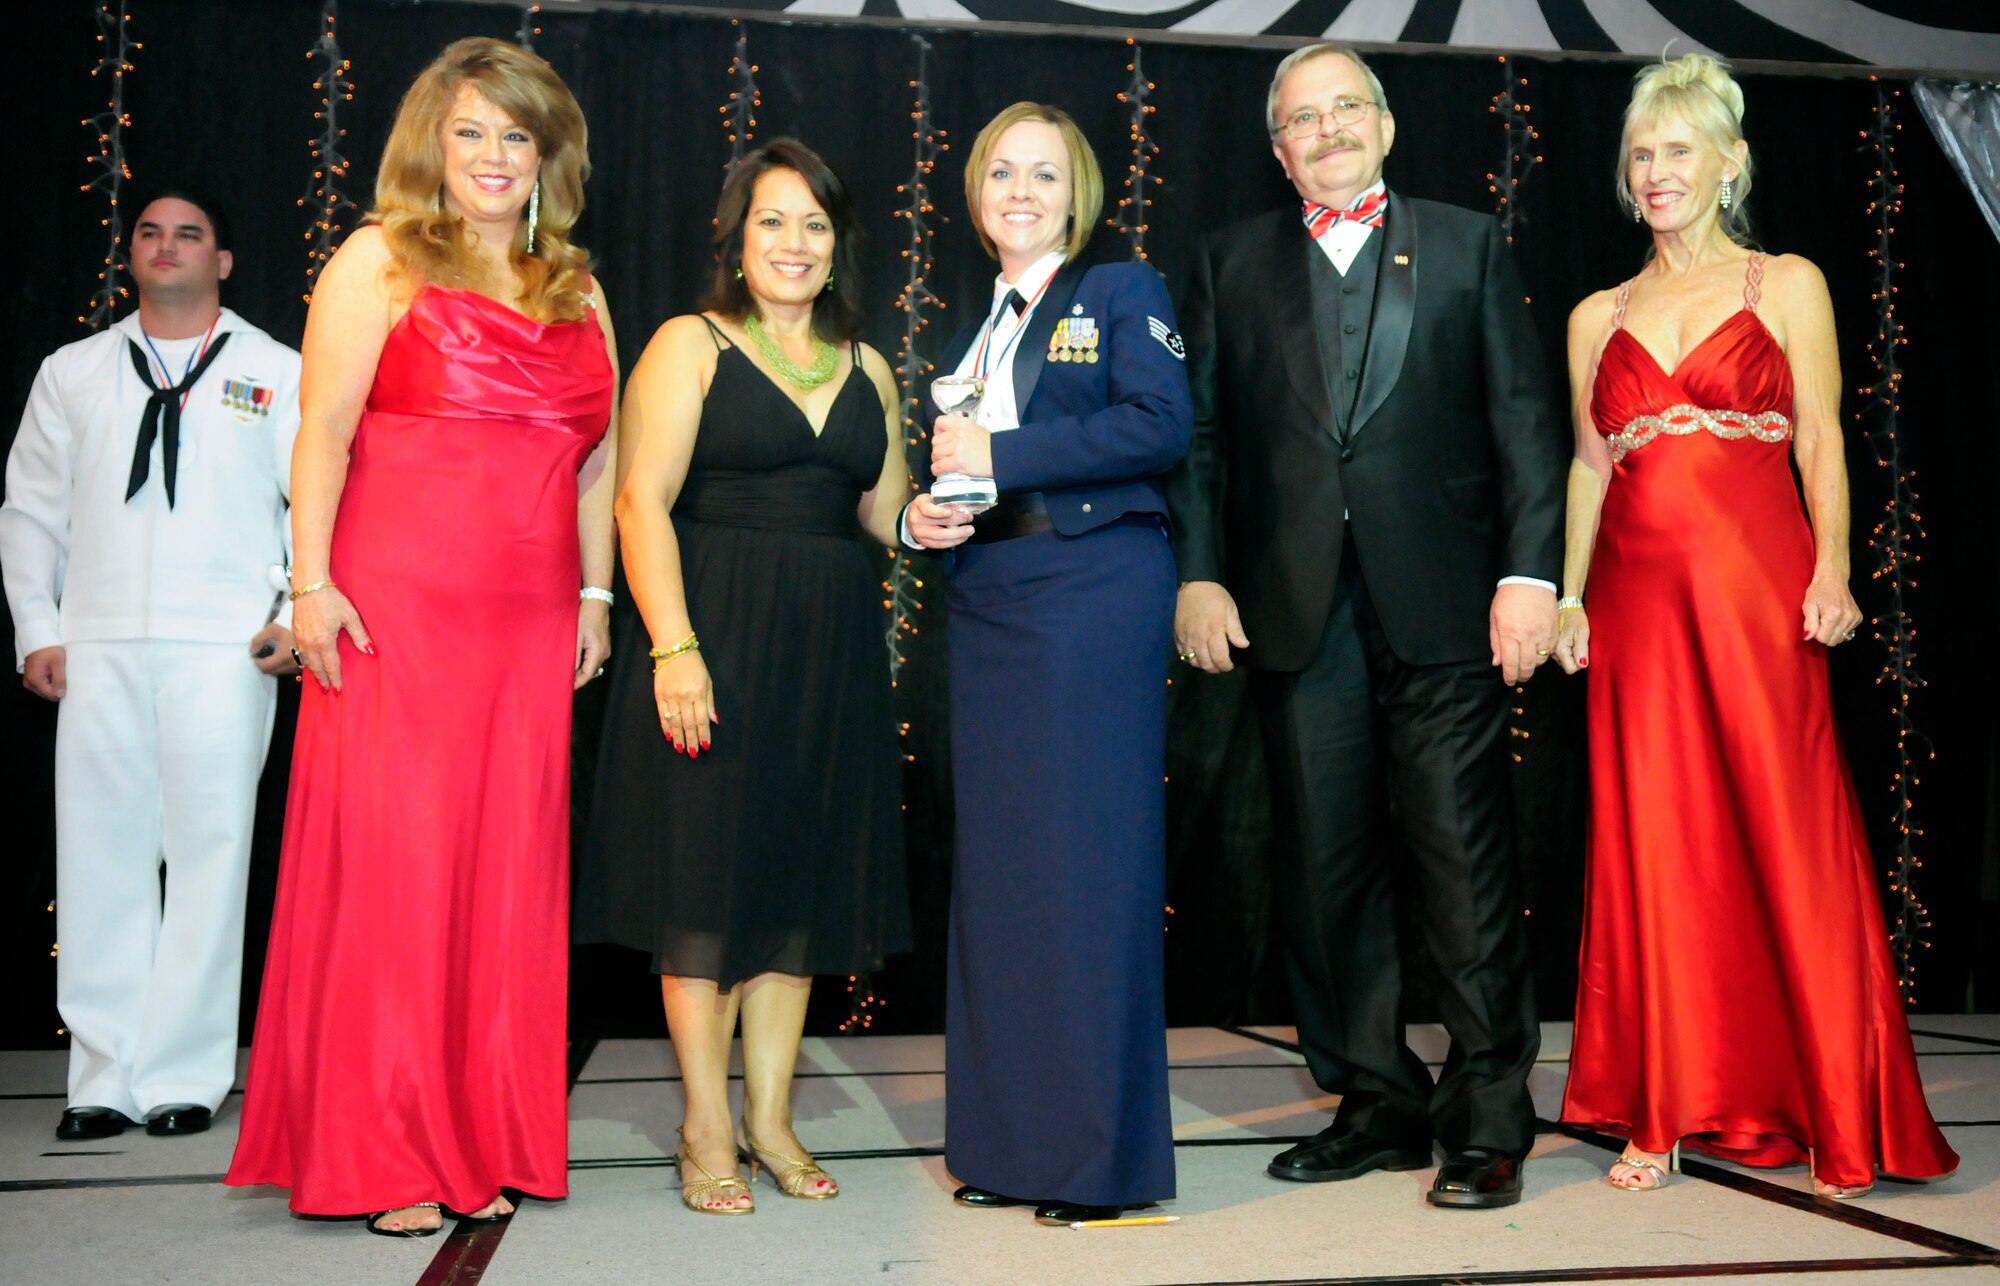 ANDERSEN AIR FORCE BASE, Guam - Staff  Sgt. Jamie Brewer, 36th Medical Support Squadron noncommissioned officer in charge of the TRICARE service center, accepts her USO Service Member of the Year Award from Guam USO Advisory Council Chair Lou Sanchez during the USO Gala at the Hyatt Hotel May 16.  Sergeant Brewer was recognized for her efforts in Iraq as she responded to 2,000 helicopter arrivals and managed 4,000 patient offloads during her deployment. The awards were presented to outstanding military members from each service on Guam during 2008. (U.S. photo by Airman 1st Class Courtney Witt)